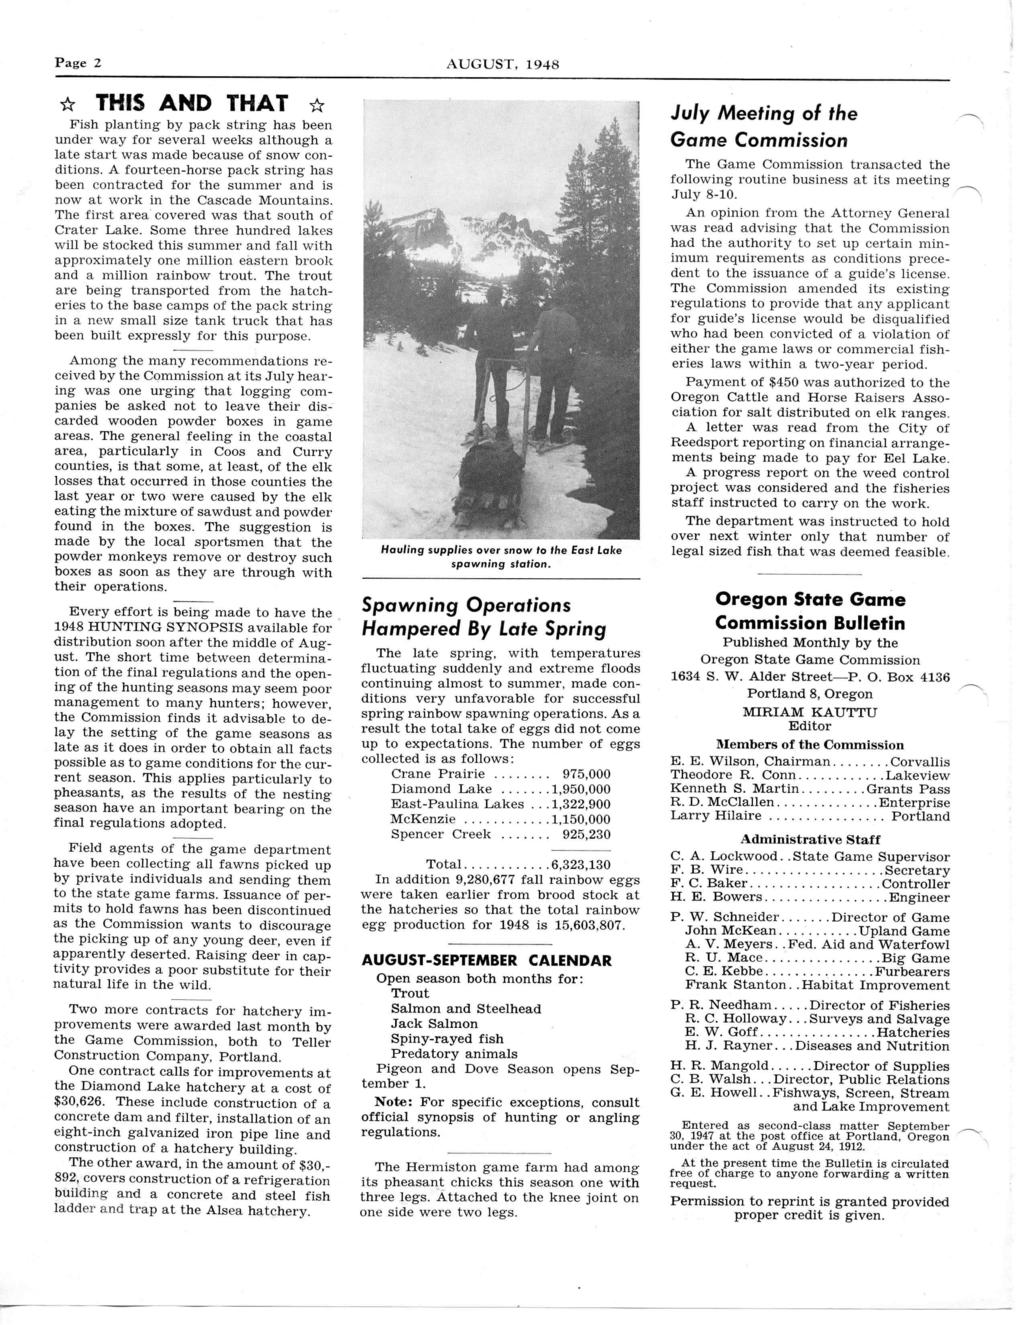 Page 2 AUGUST, 1948 * THIS AND THAT Fish planting by pack string has been under way for several weeks although a late start was made because of snow conditions.